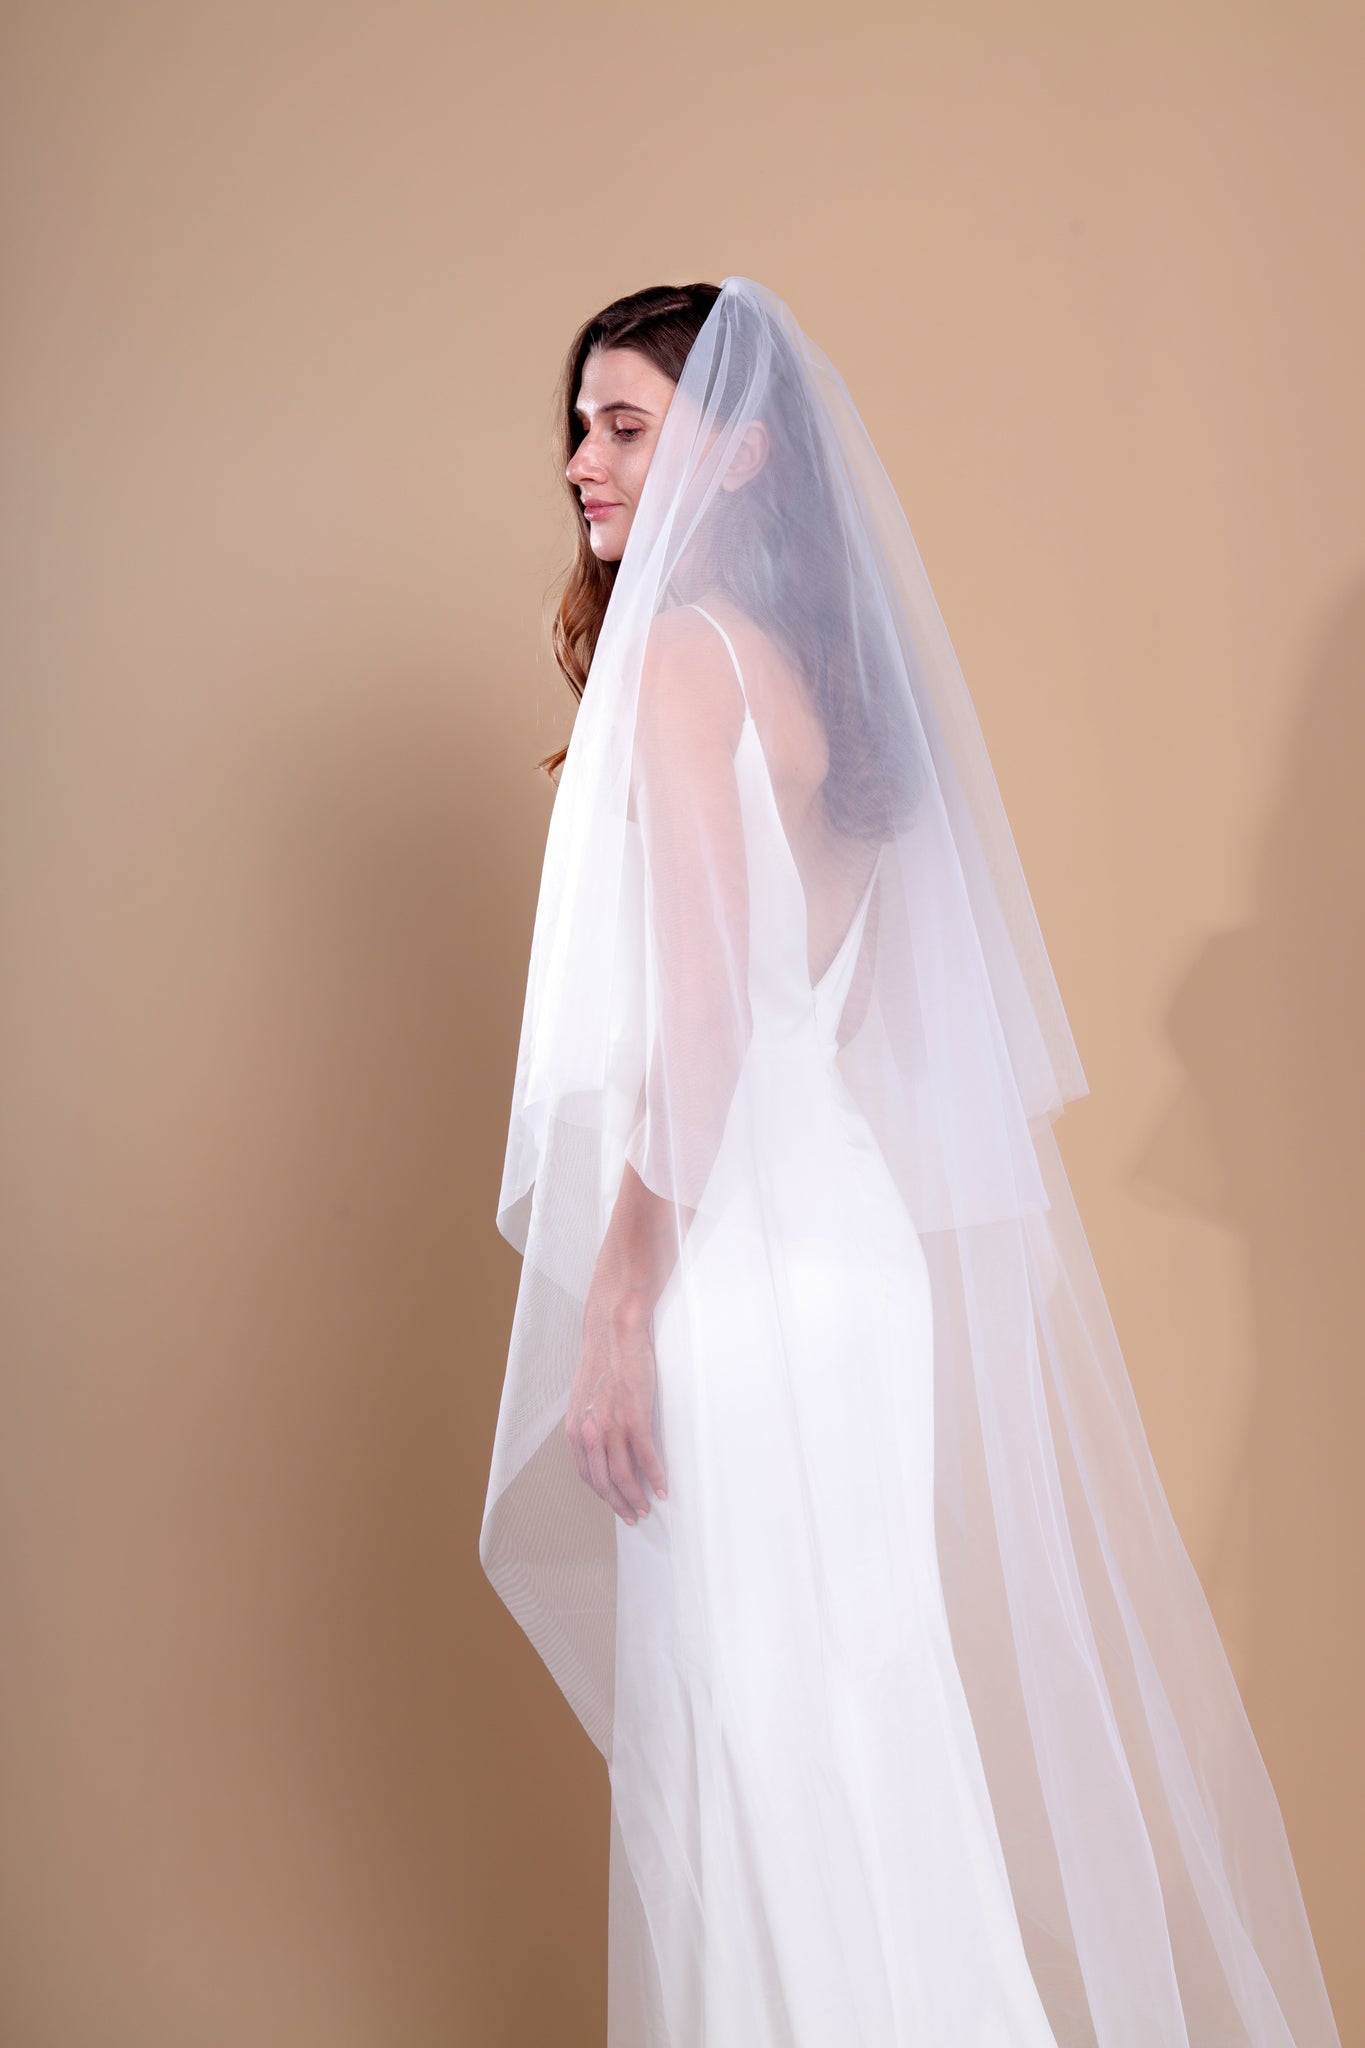 Nikki - two layer cathedral length veil with a simple edge finish